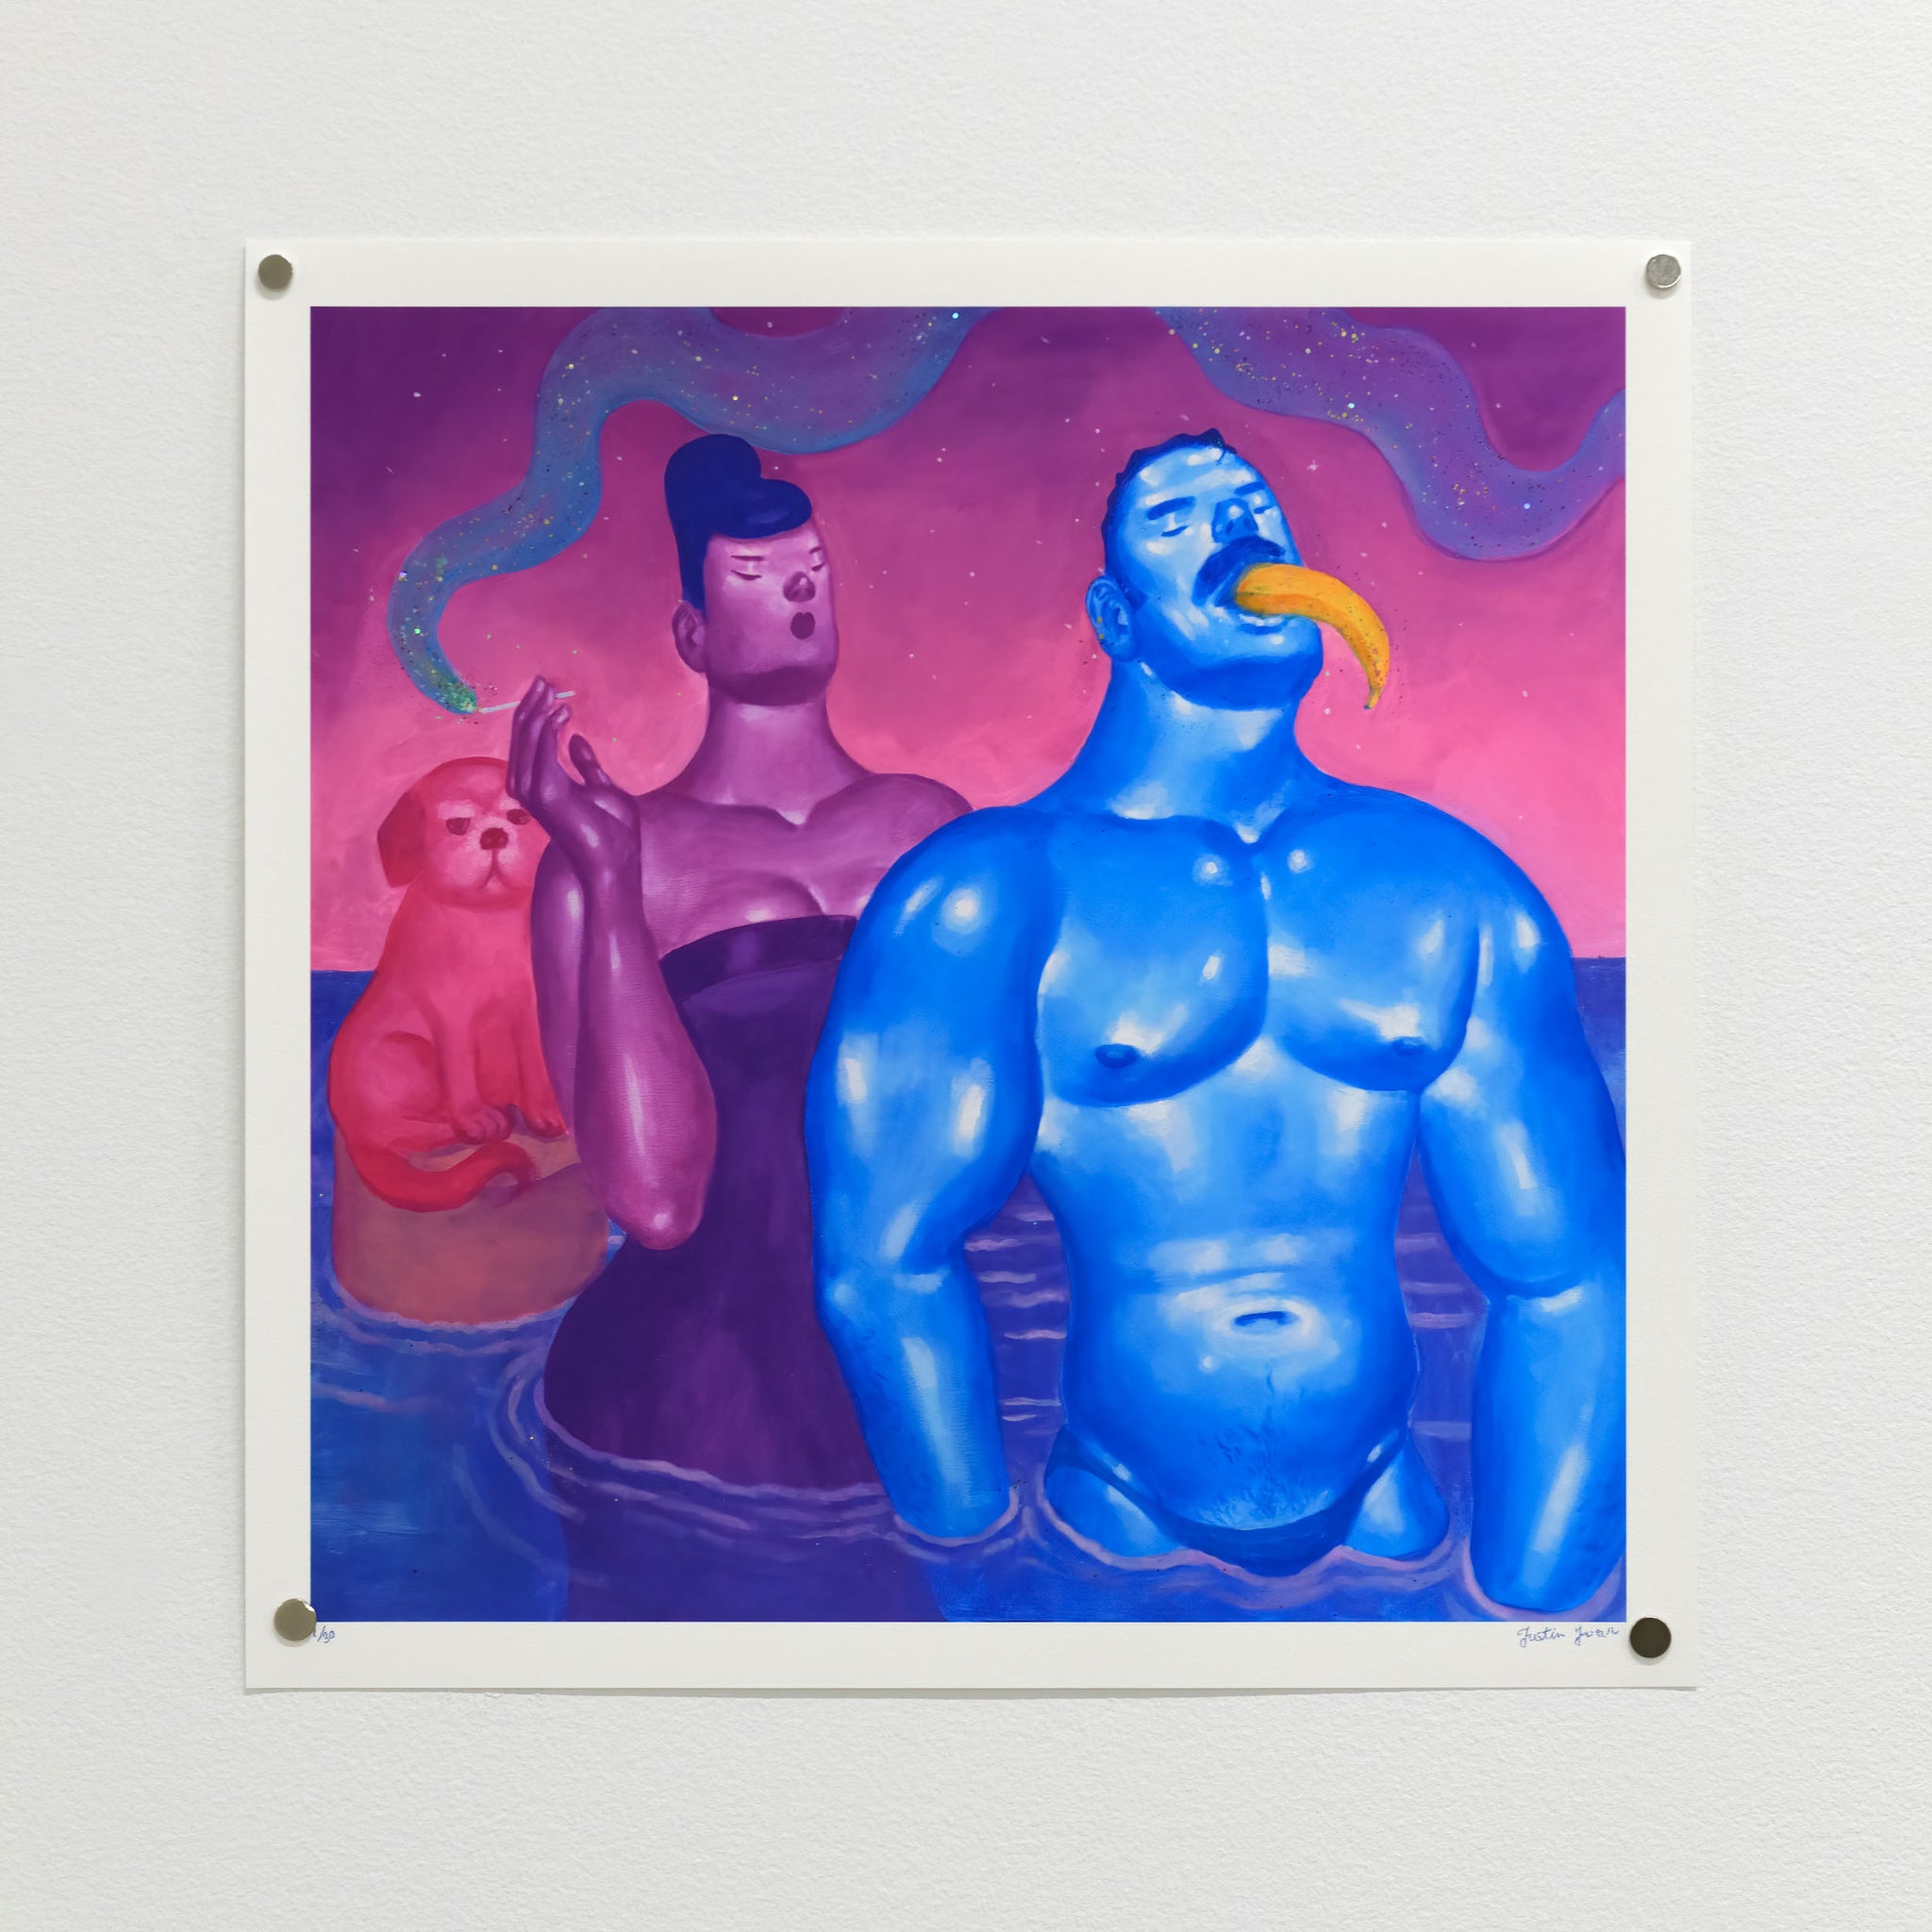 Justin Yoon - "In The Blue Of The Evening" print